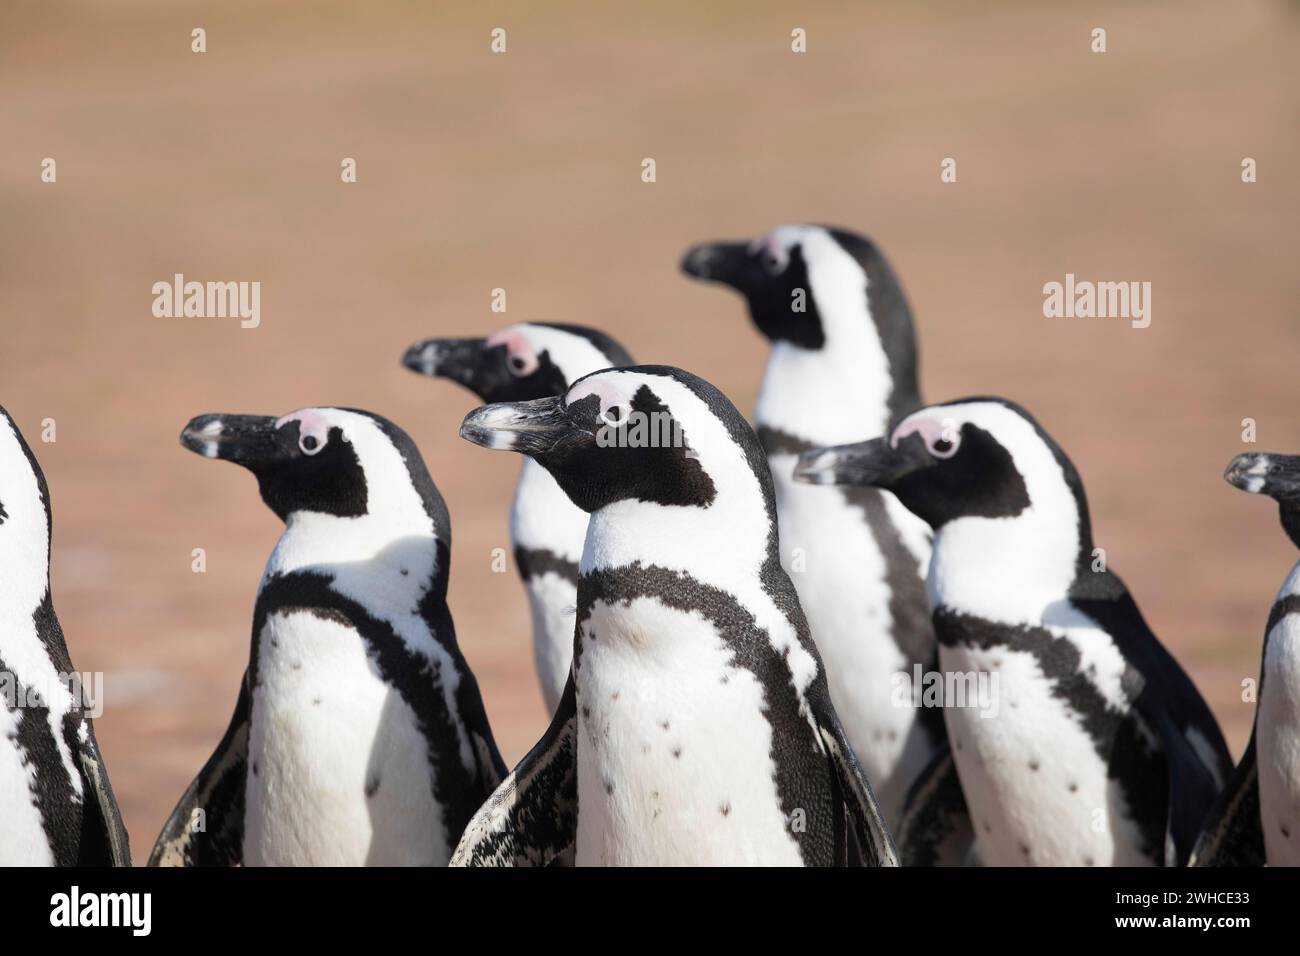 Africa, African Penguins, Spheniscus demersus, endangered species, IUCN Red List, Overberg, Seabird, South Africa, Stony Point Nature Reserve, Western Cape Province, Stoney Point Nature Reserve, Overstrand, coastal beach, marine Stock Photo